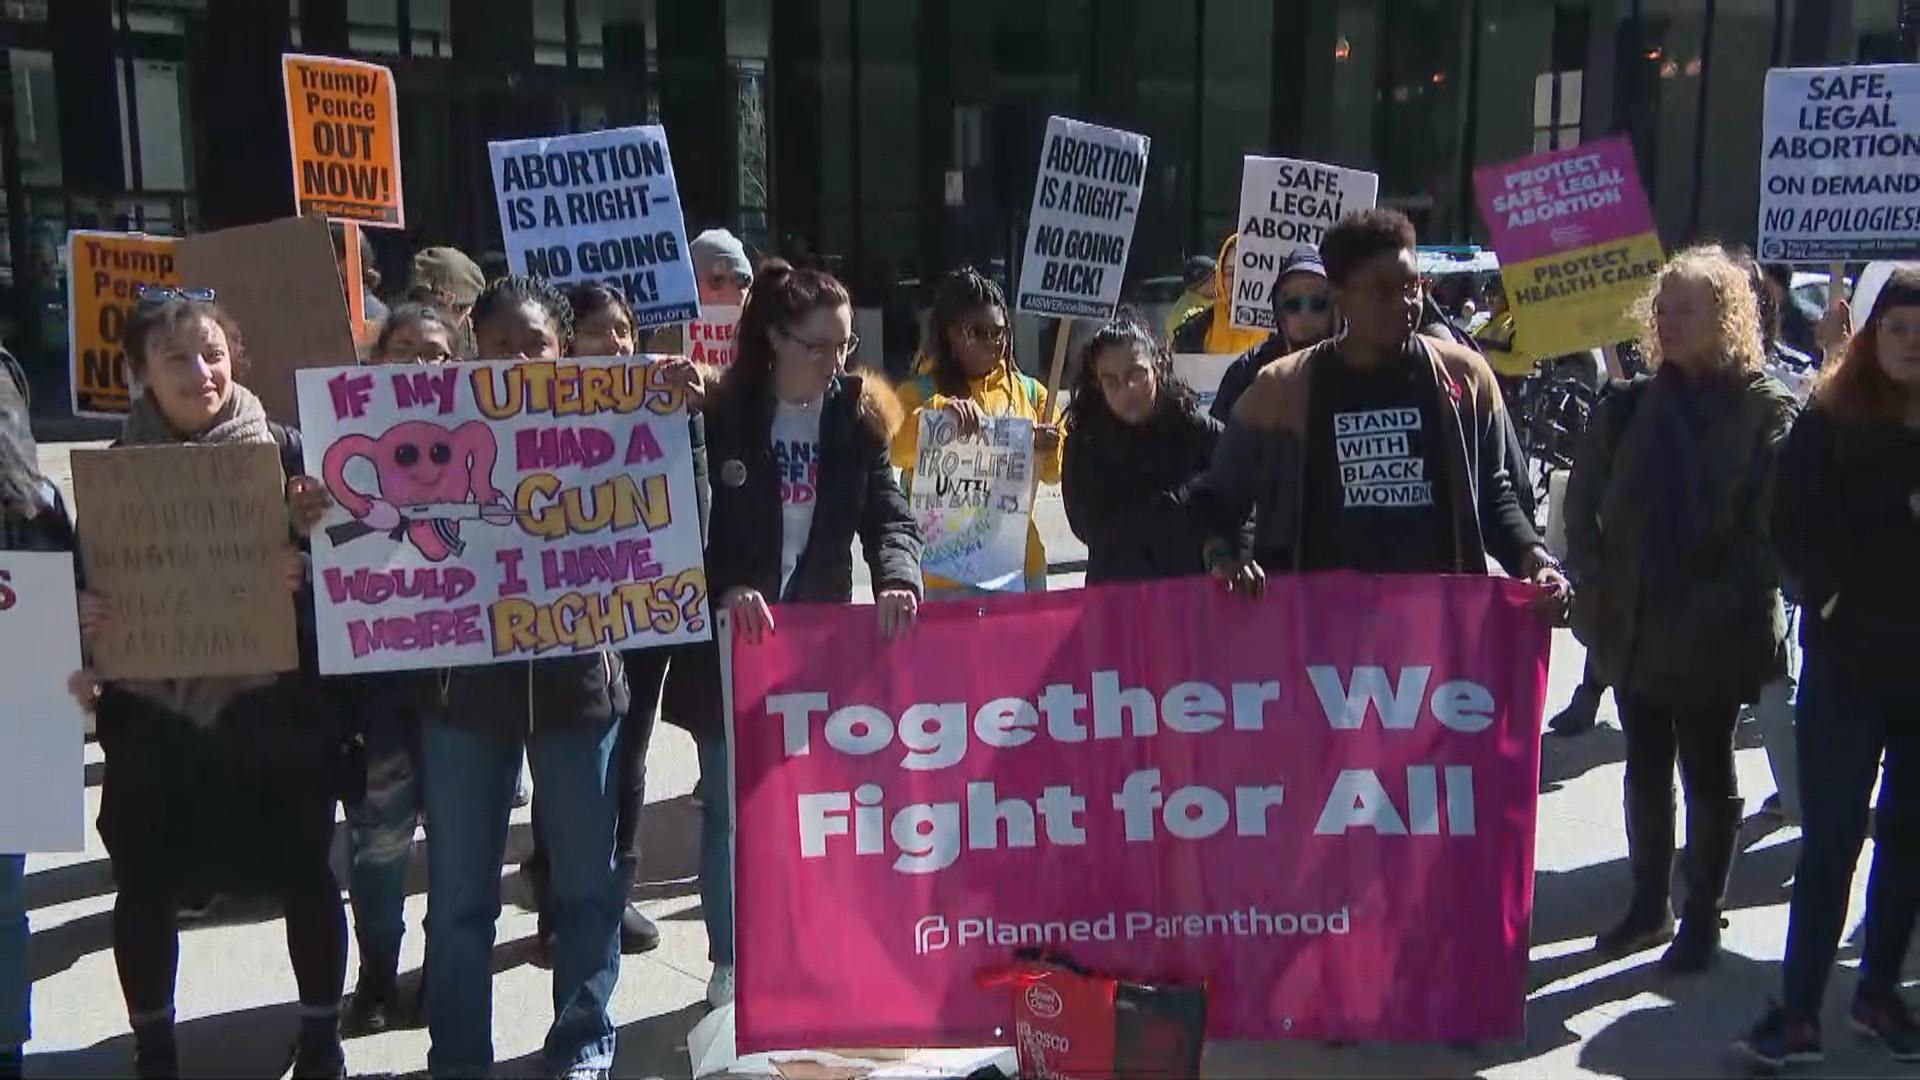 Abortion rights activists rally in Chicago on Wednesday, March 4, 2020. (WTTW News)